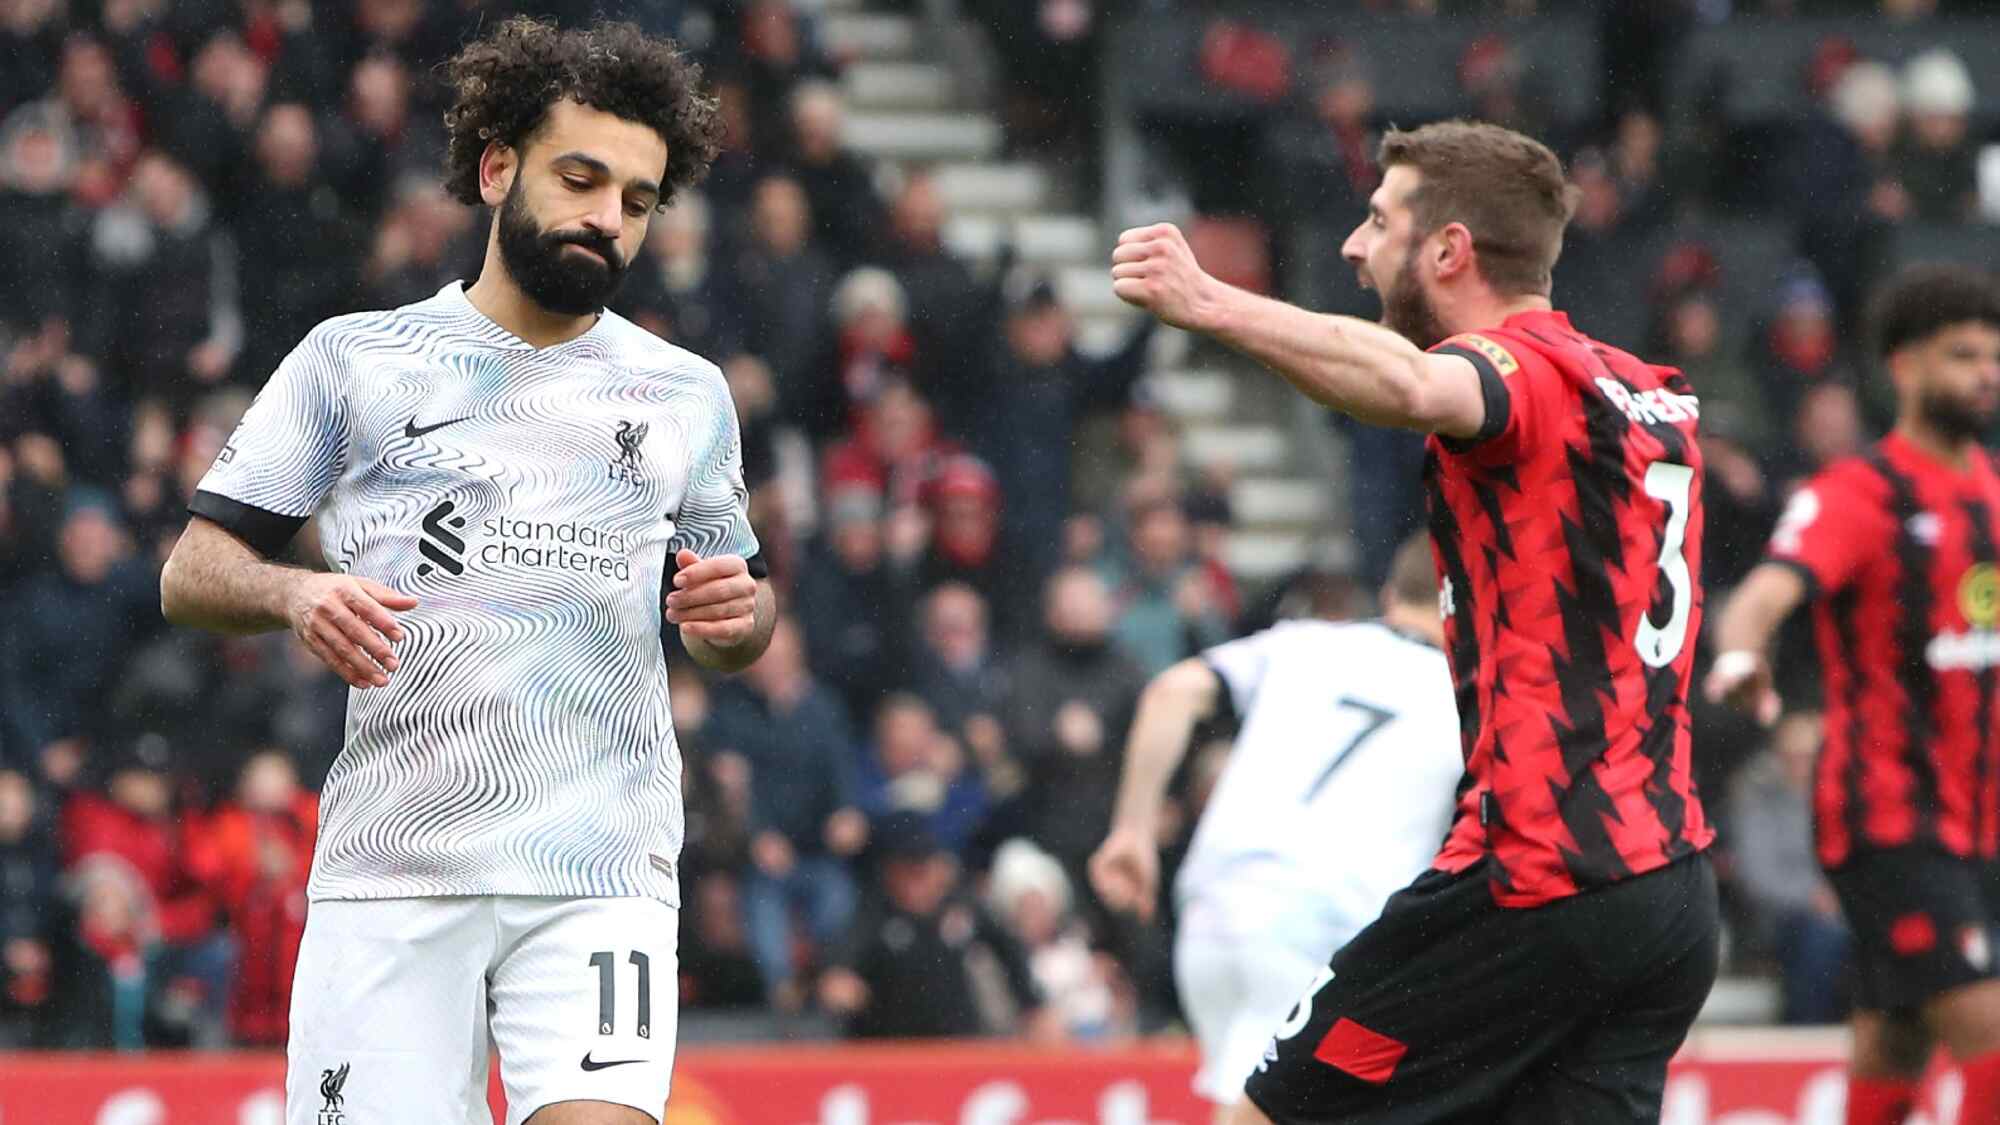 Klopp admits he is 'concerned' about Liverpool after defeat to Bournemouth